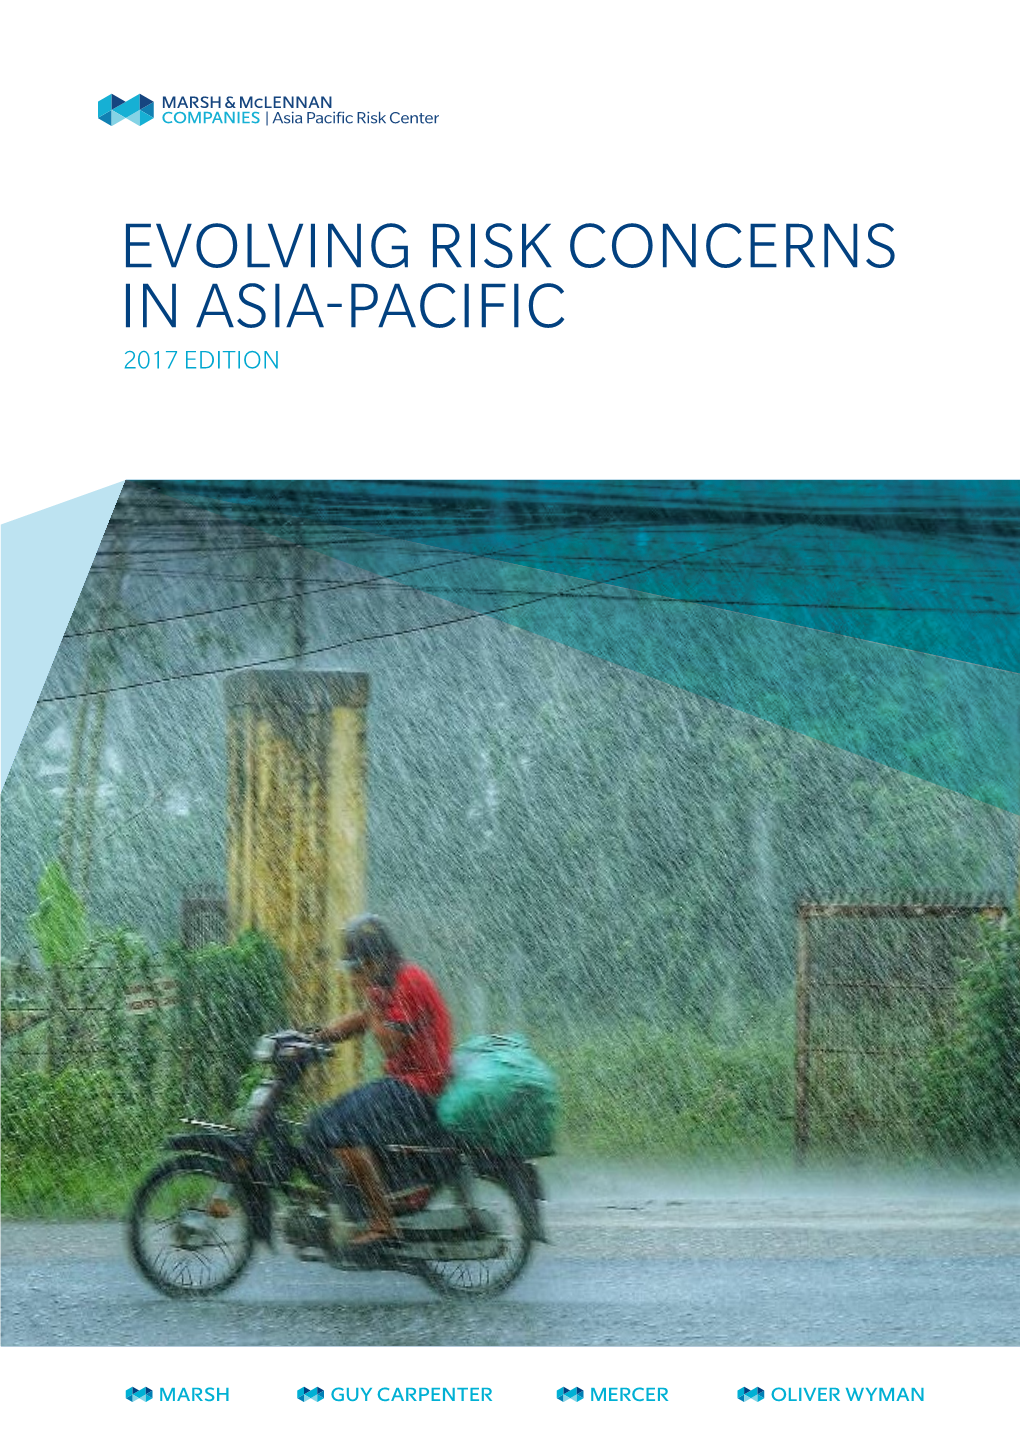 Evolving Risk Concerns in Asia-Pacific 2017 Edition Table of Contents